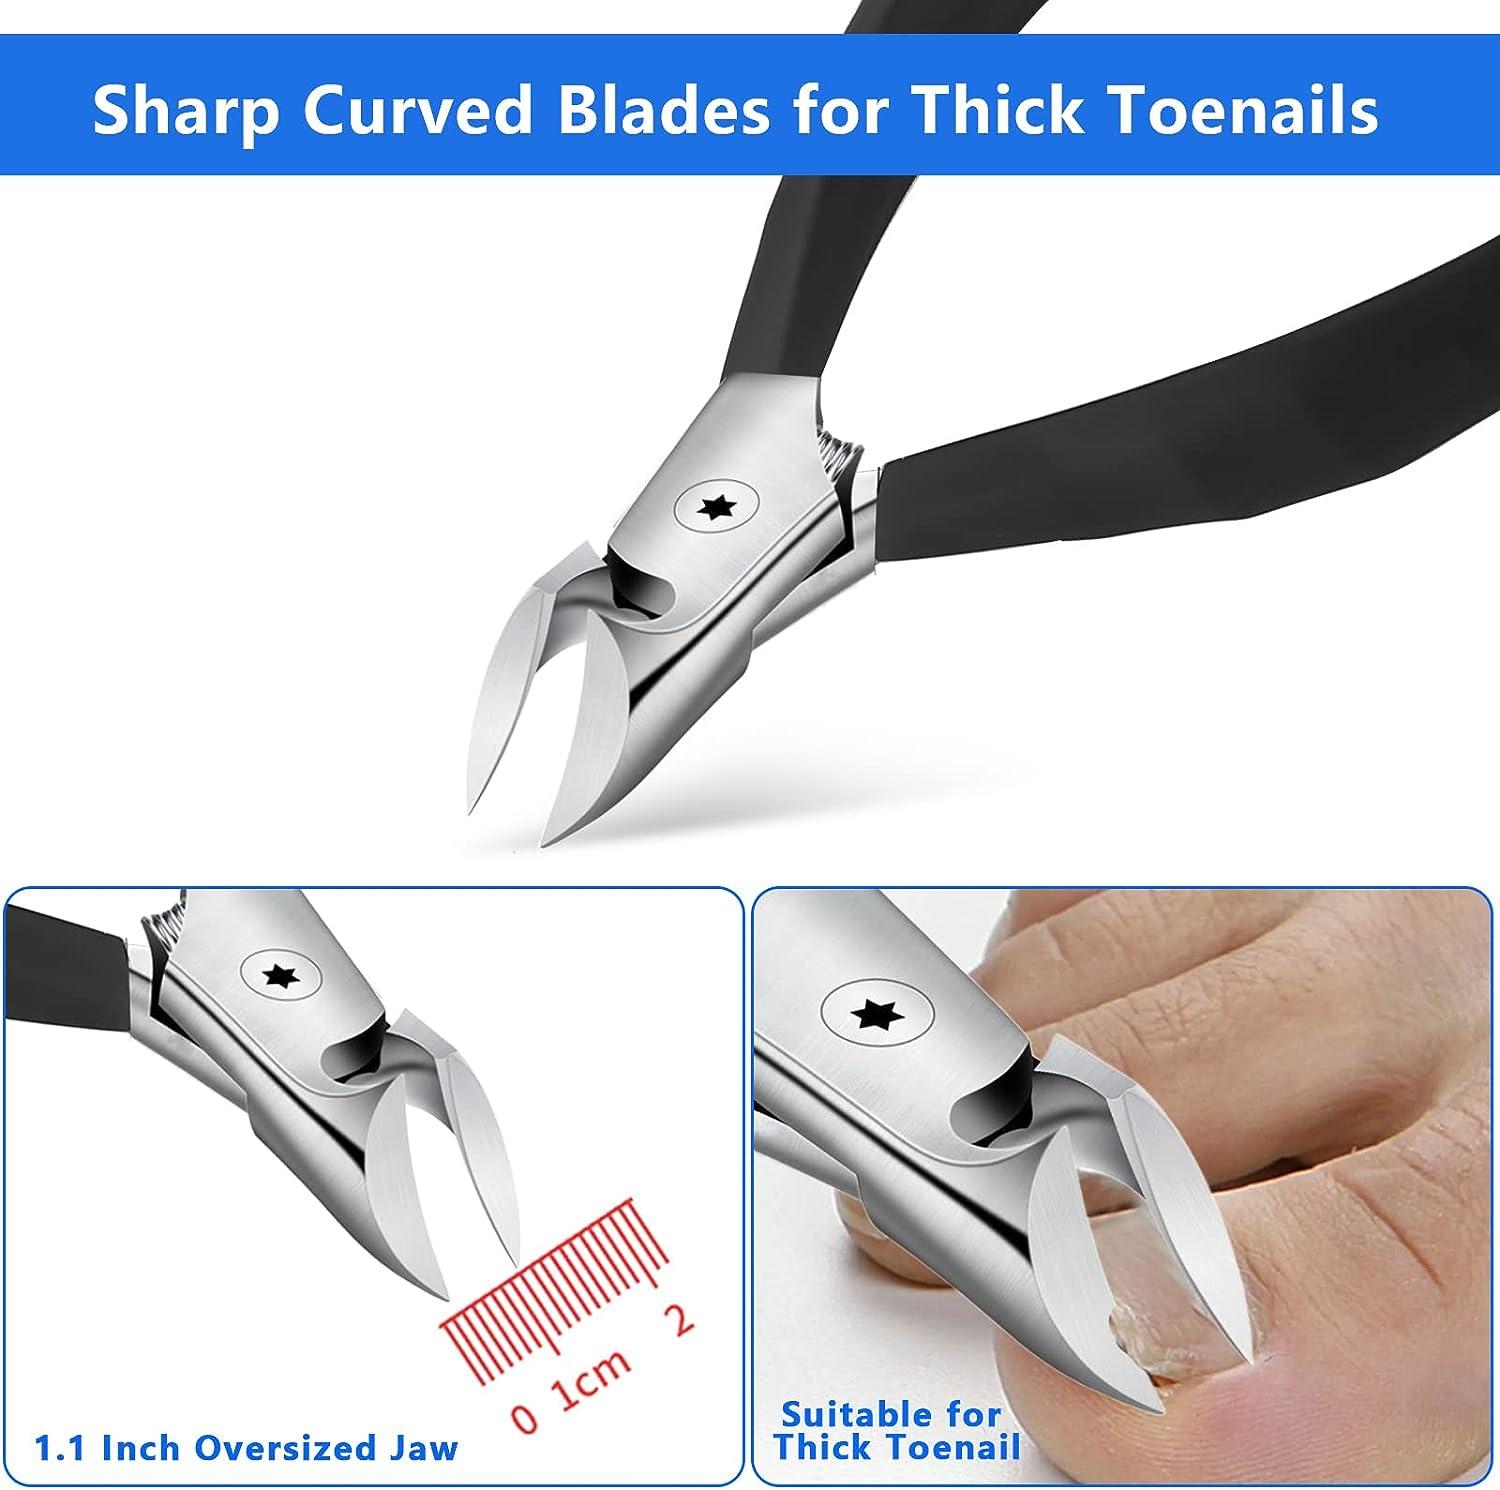 Toenail Clippers For Elderly, Used For Thick Toenails Fungi Toenails  Ingrown Toenails. Long Handle, Leather Packaging, Safe